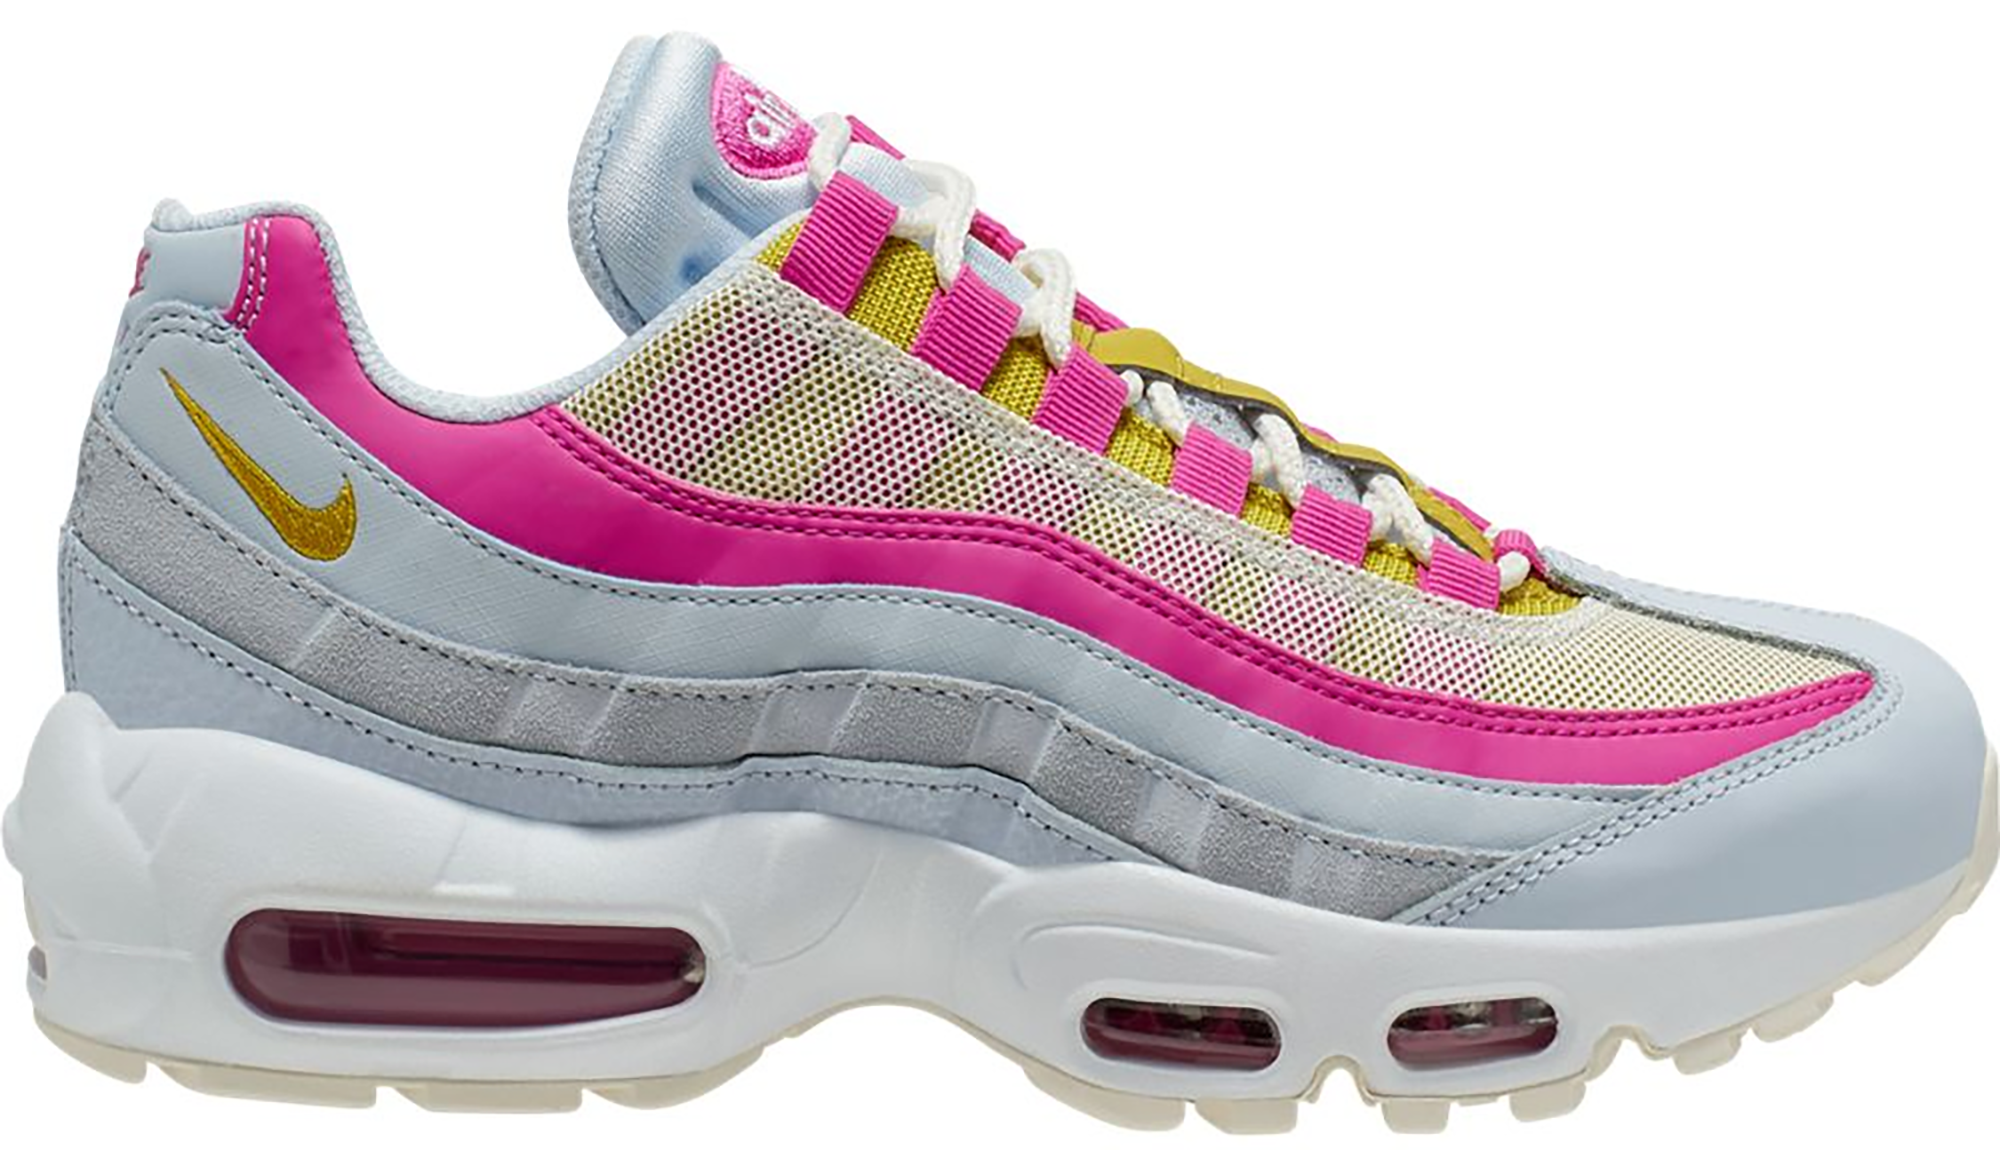 nike air max 95 trainers in pink